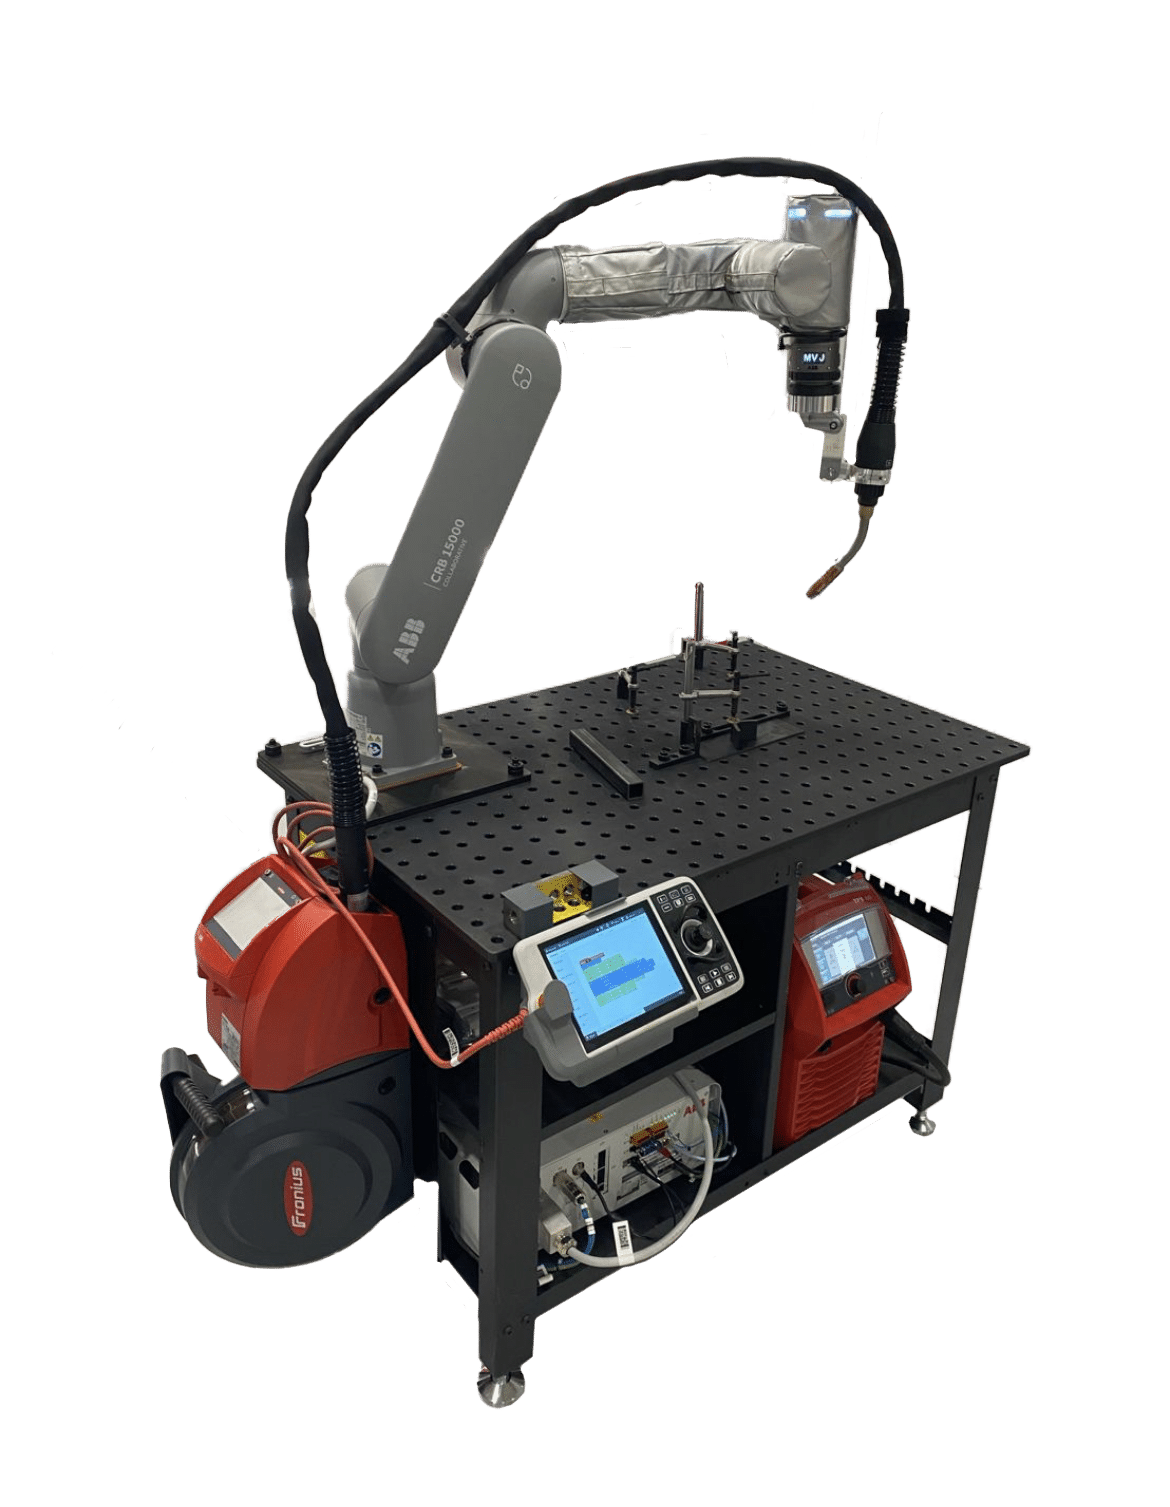 Robotic Welding Systems